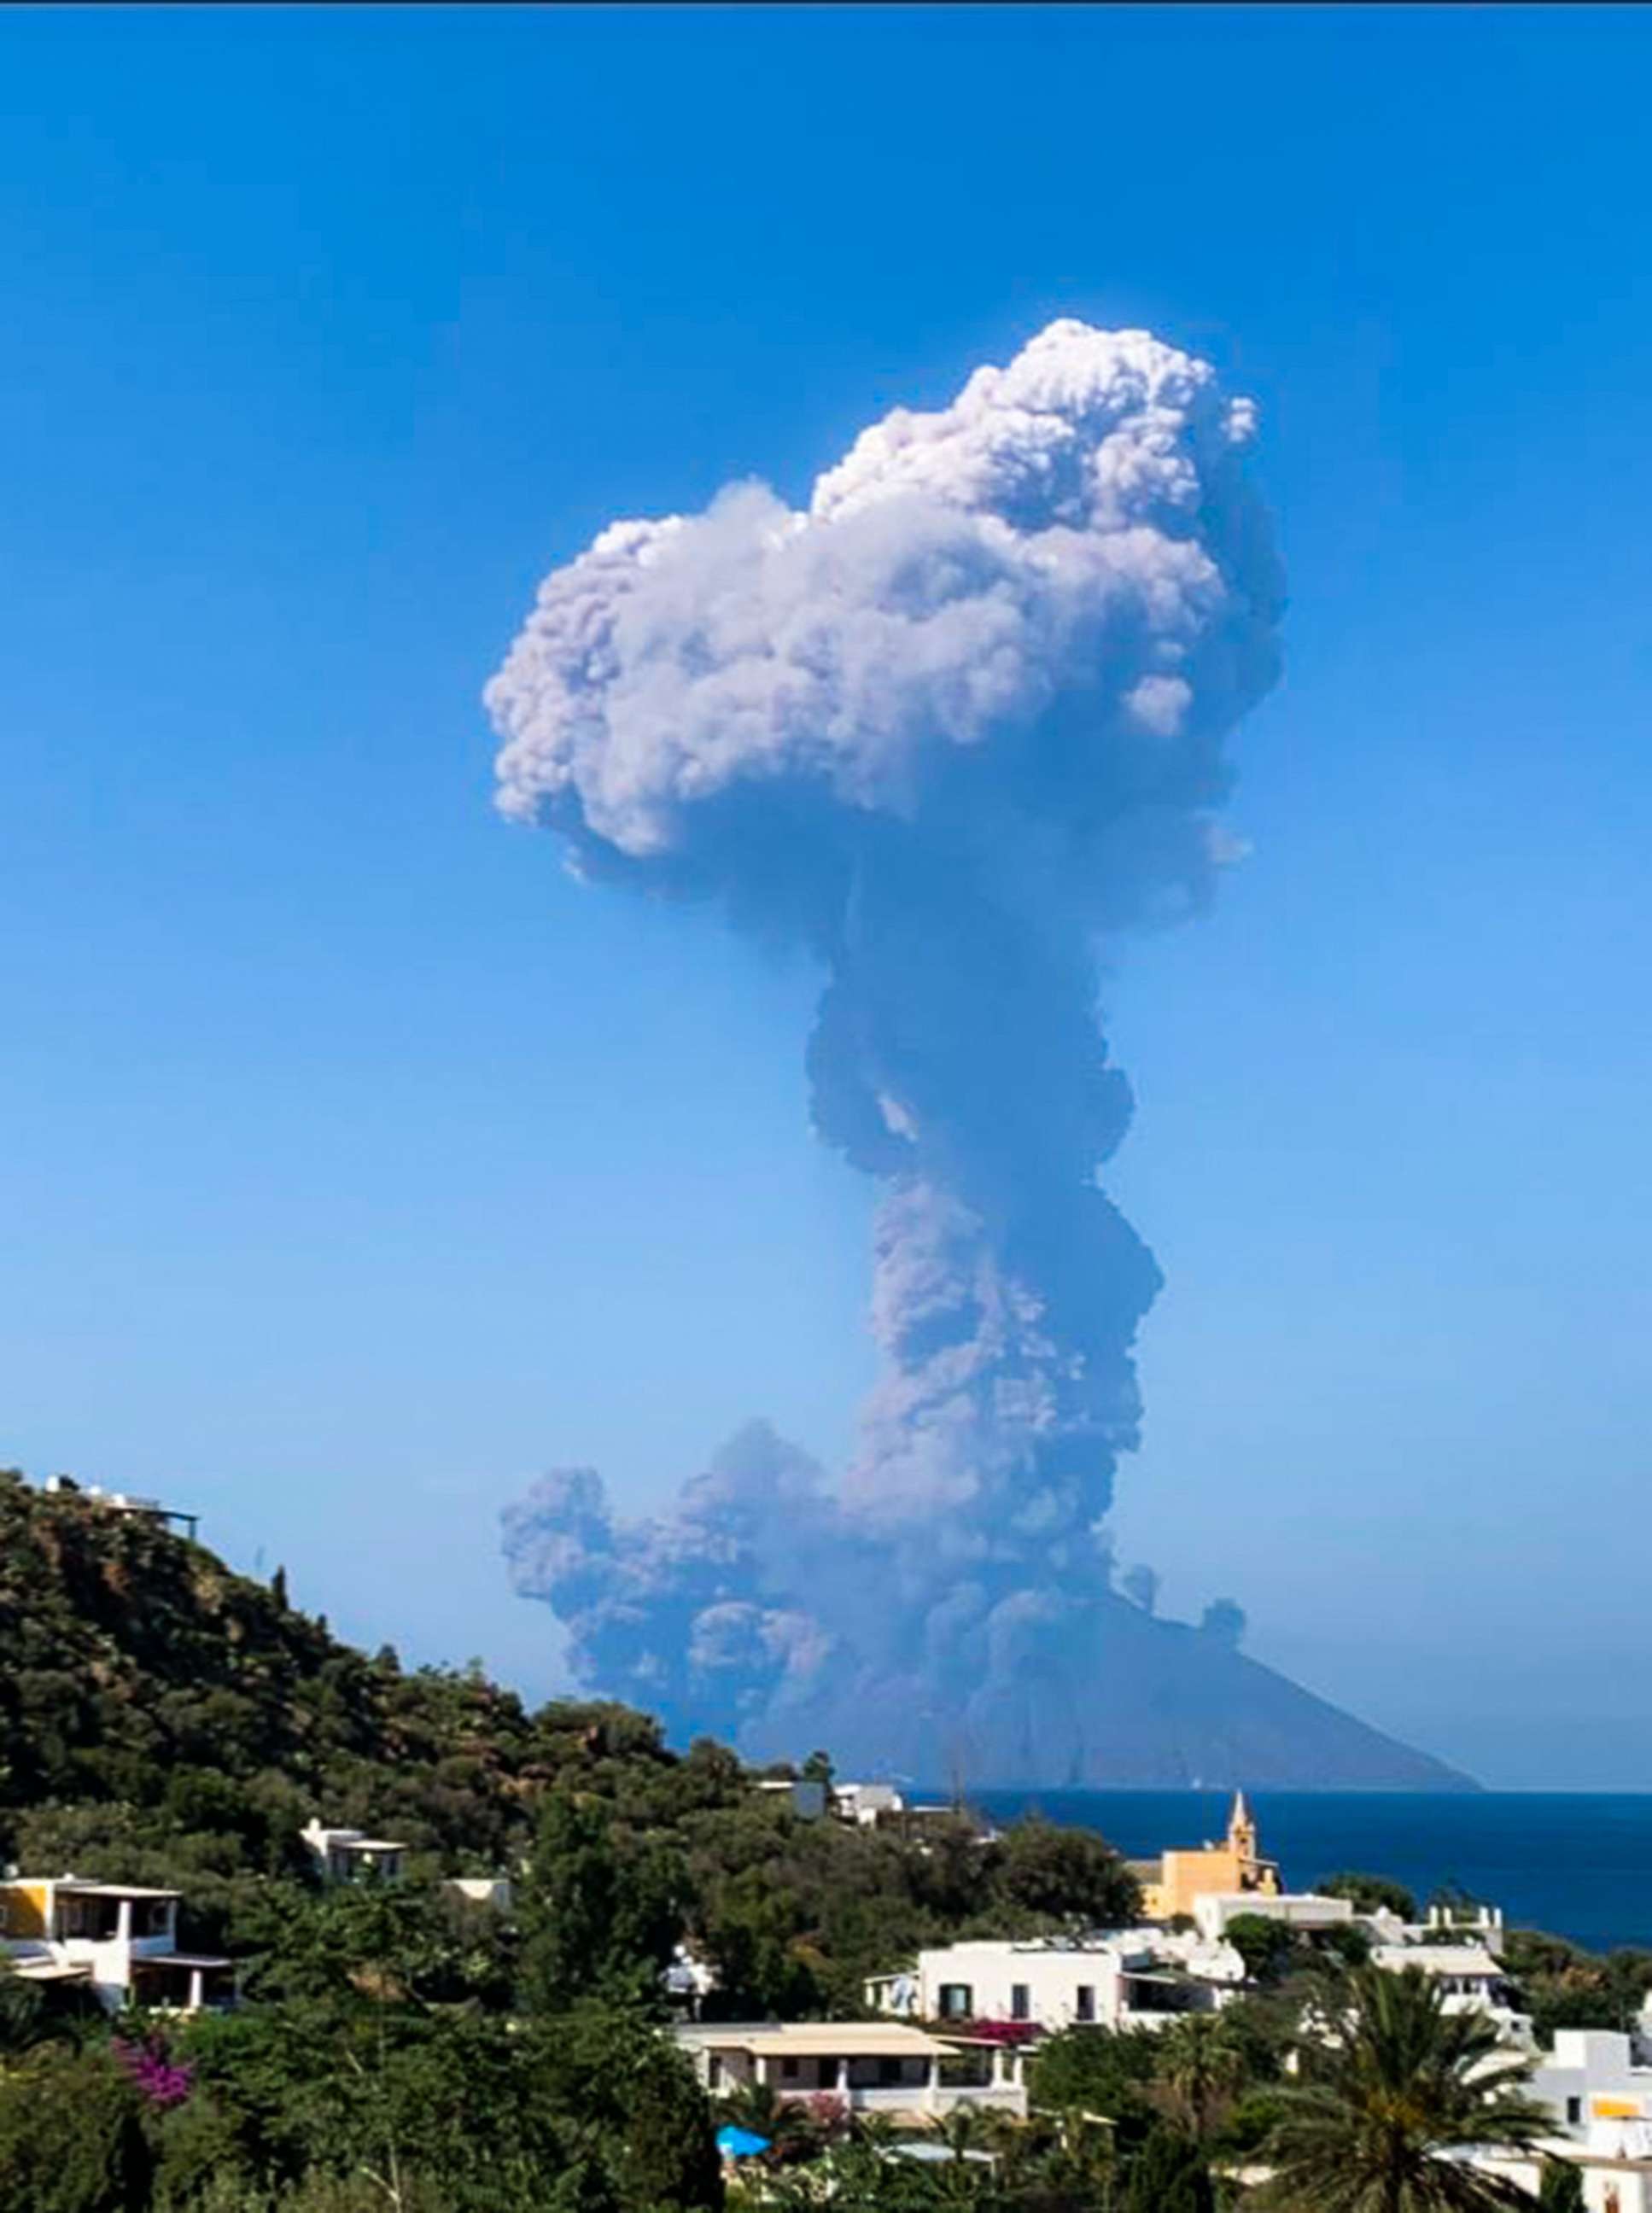 PHOTO: The Stromboli volcano erupts, July 3, 2019, as seen from the nearby island of Panarea, Italy.